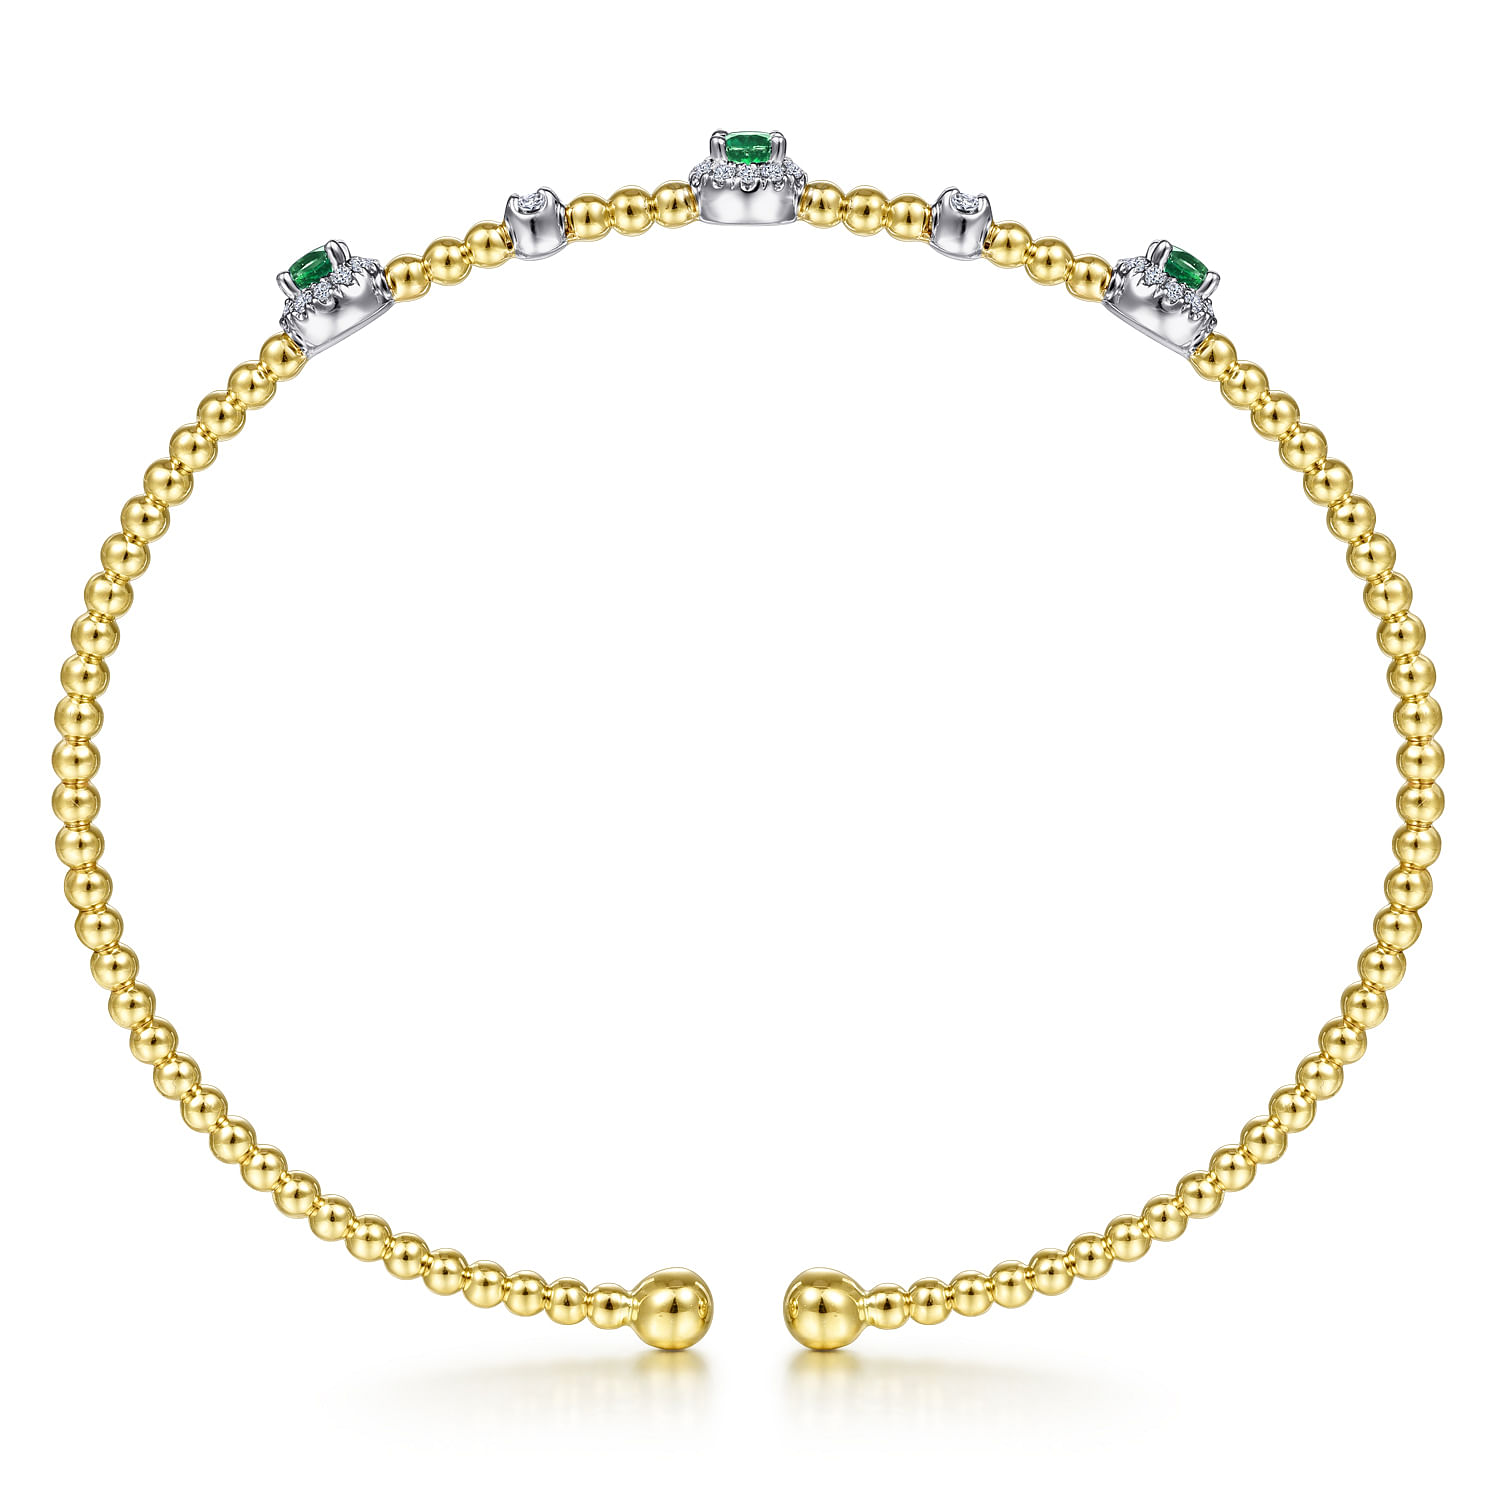 14K White-Yellow Gold Bujukan Bead Cuff Bracelet with Emerald and Diamond Halo Stations